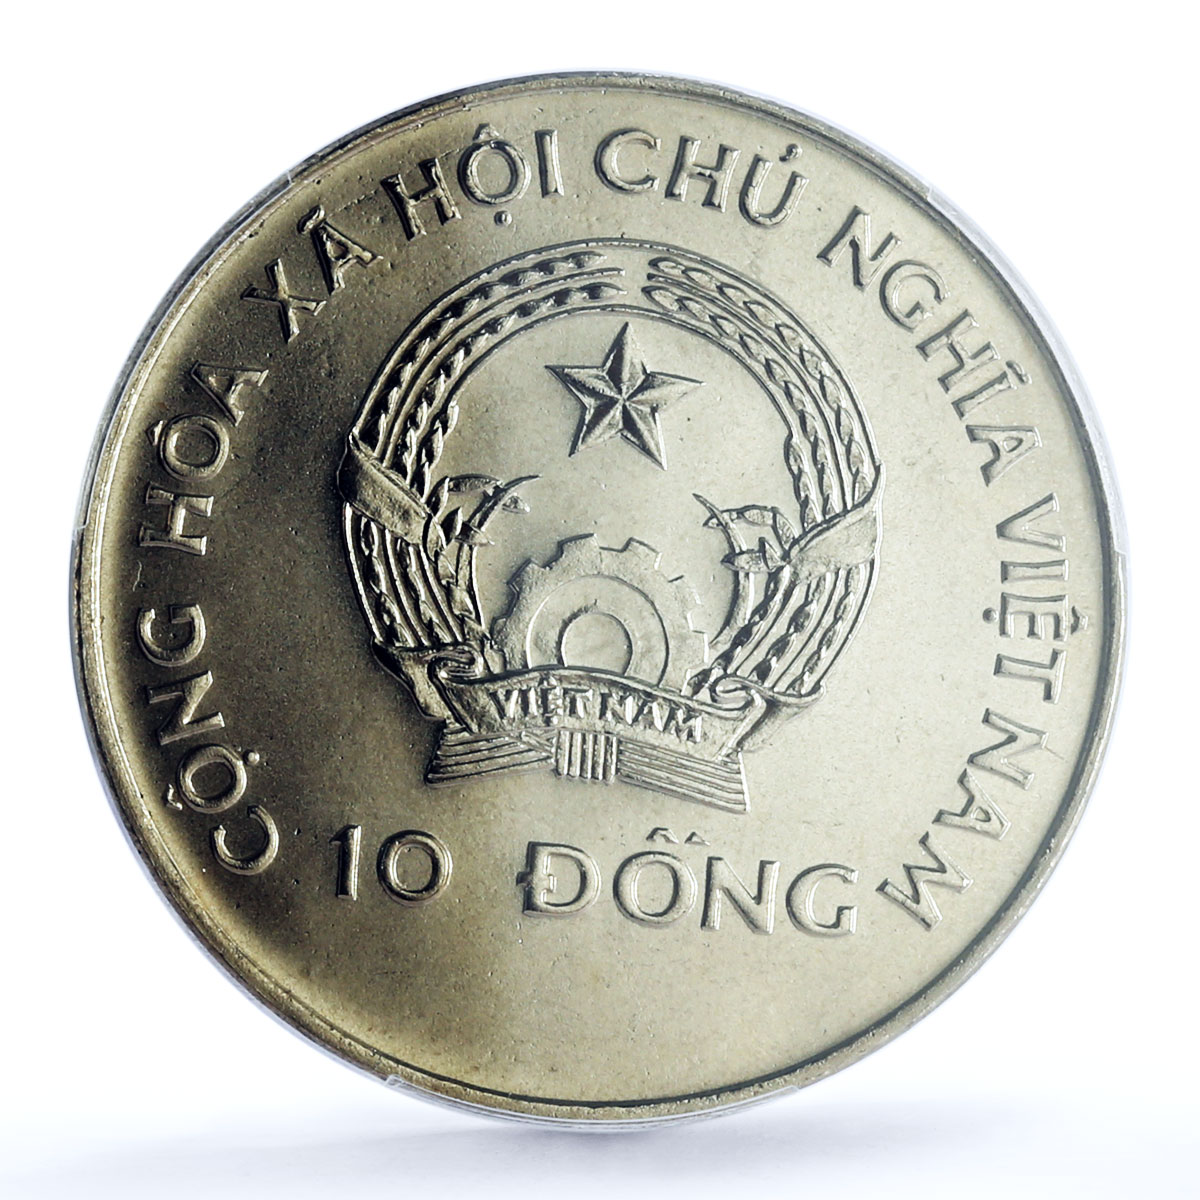 Vietnam 10 dong World Food Summit Woman Holding Grain MS67 PCGS CuNi coin 1996